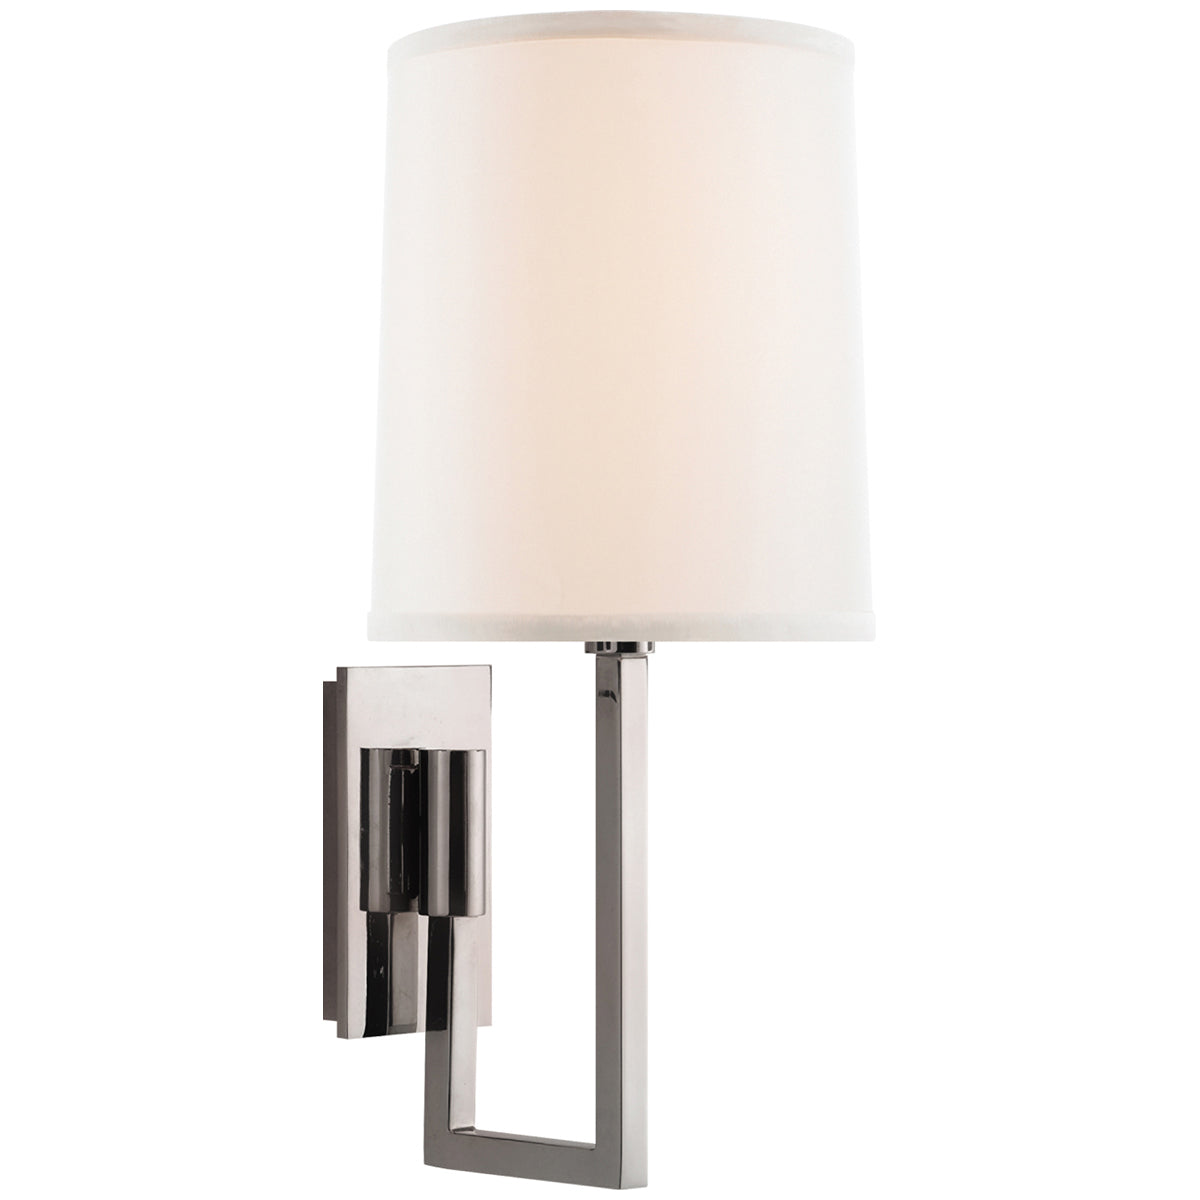 Visual Comfort Aspect Library Sconce